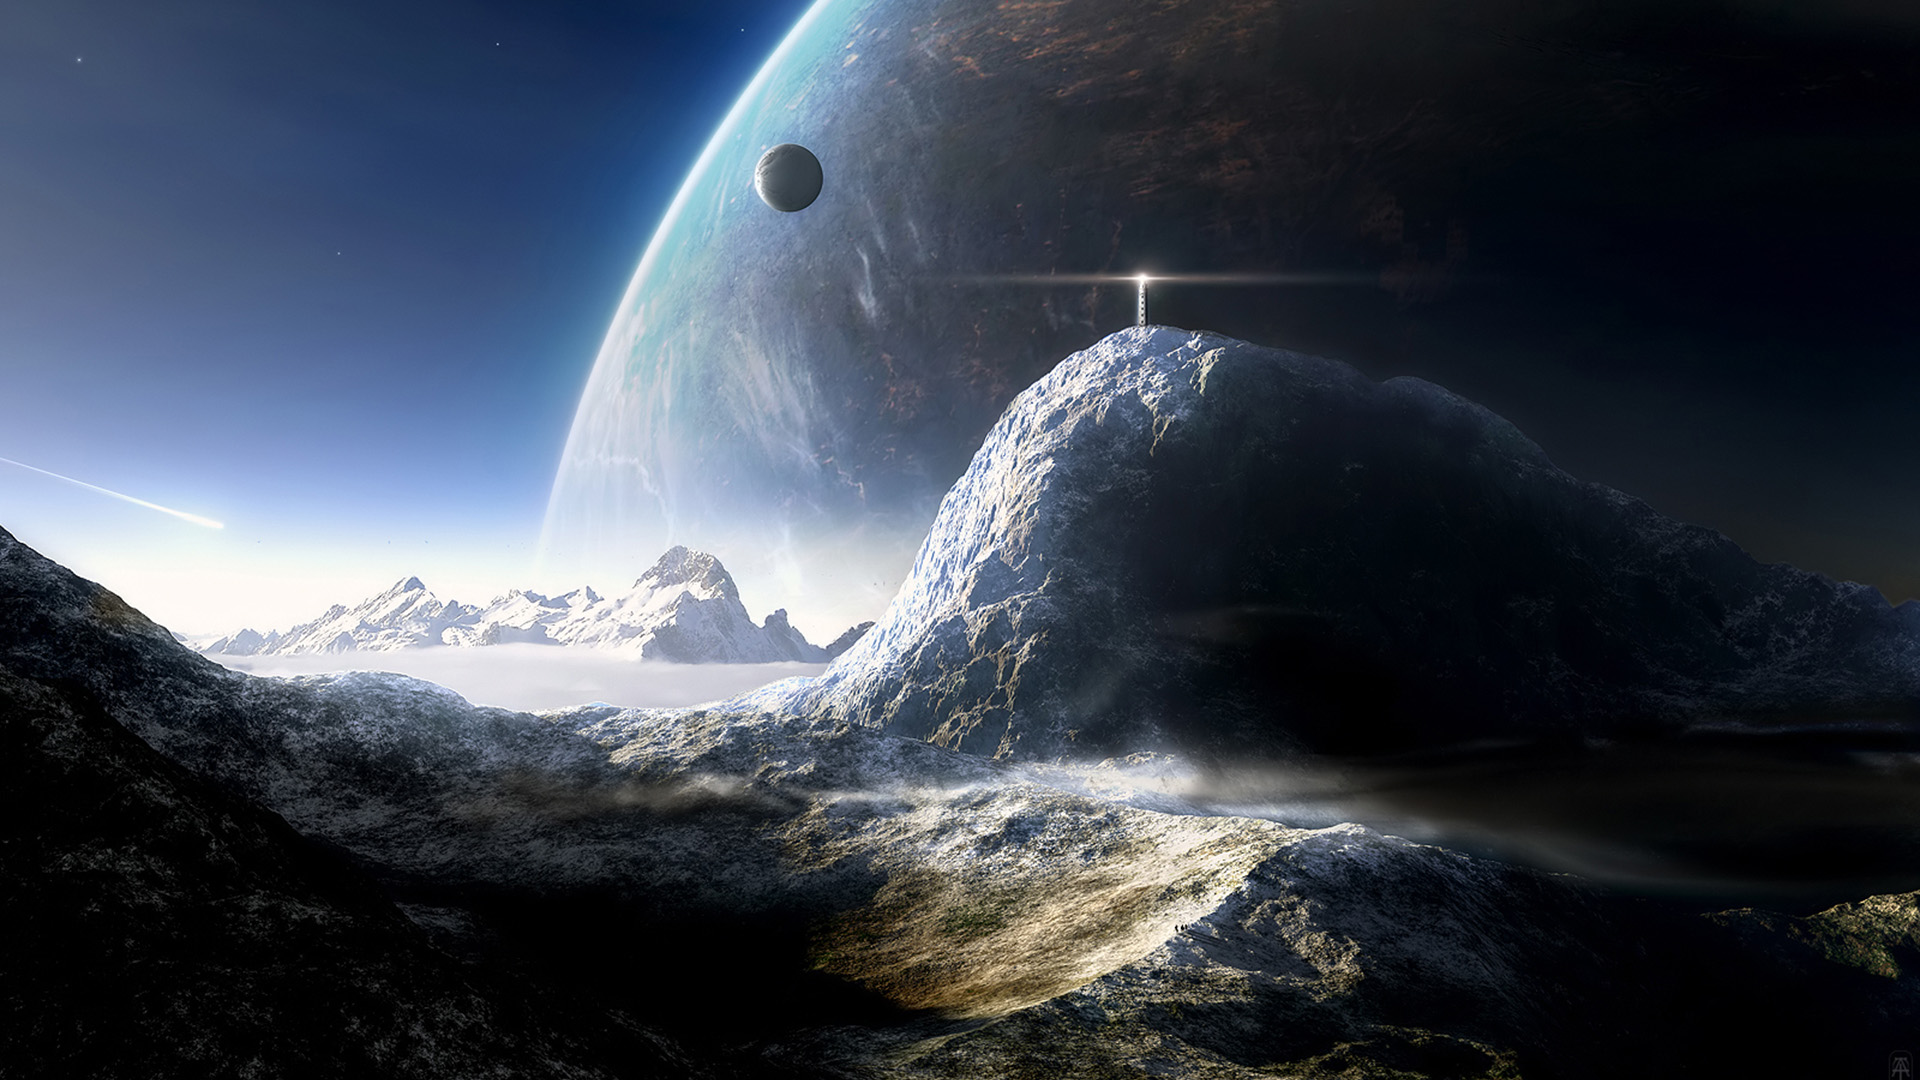 Space Wallpaper Search Results Universe - Hd Wallpaper 1920x1080 Universe - HD Wallpaper 